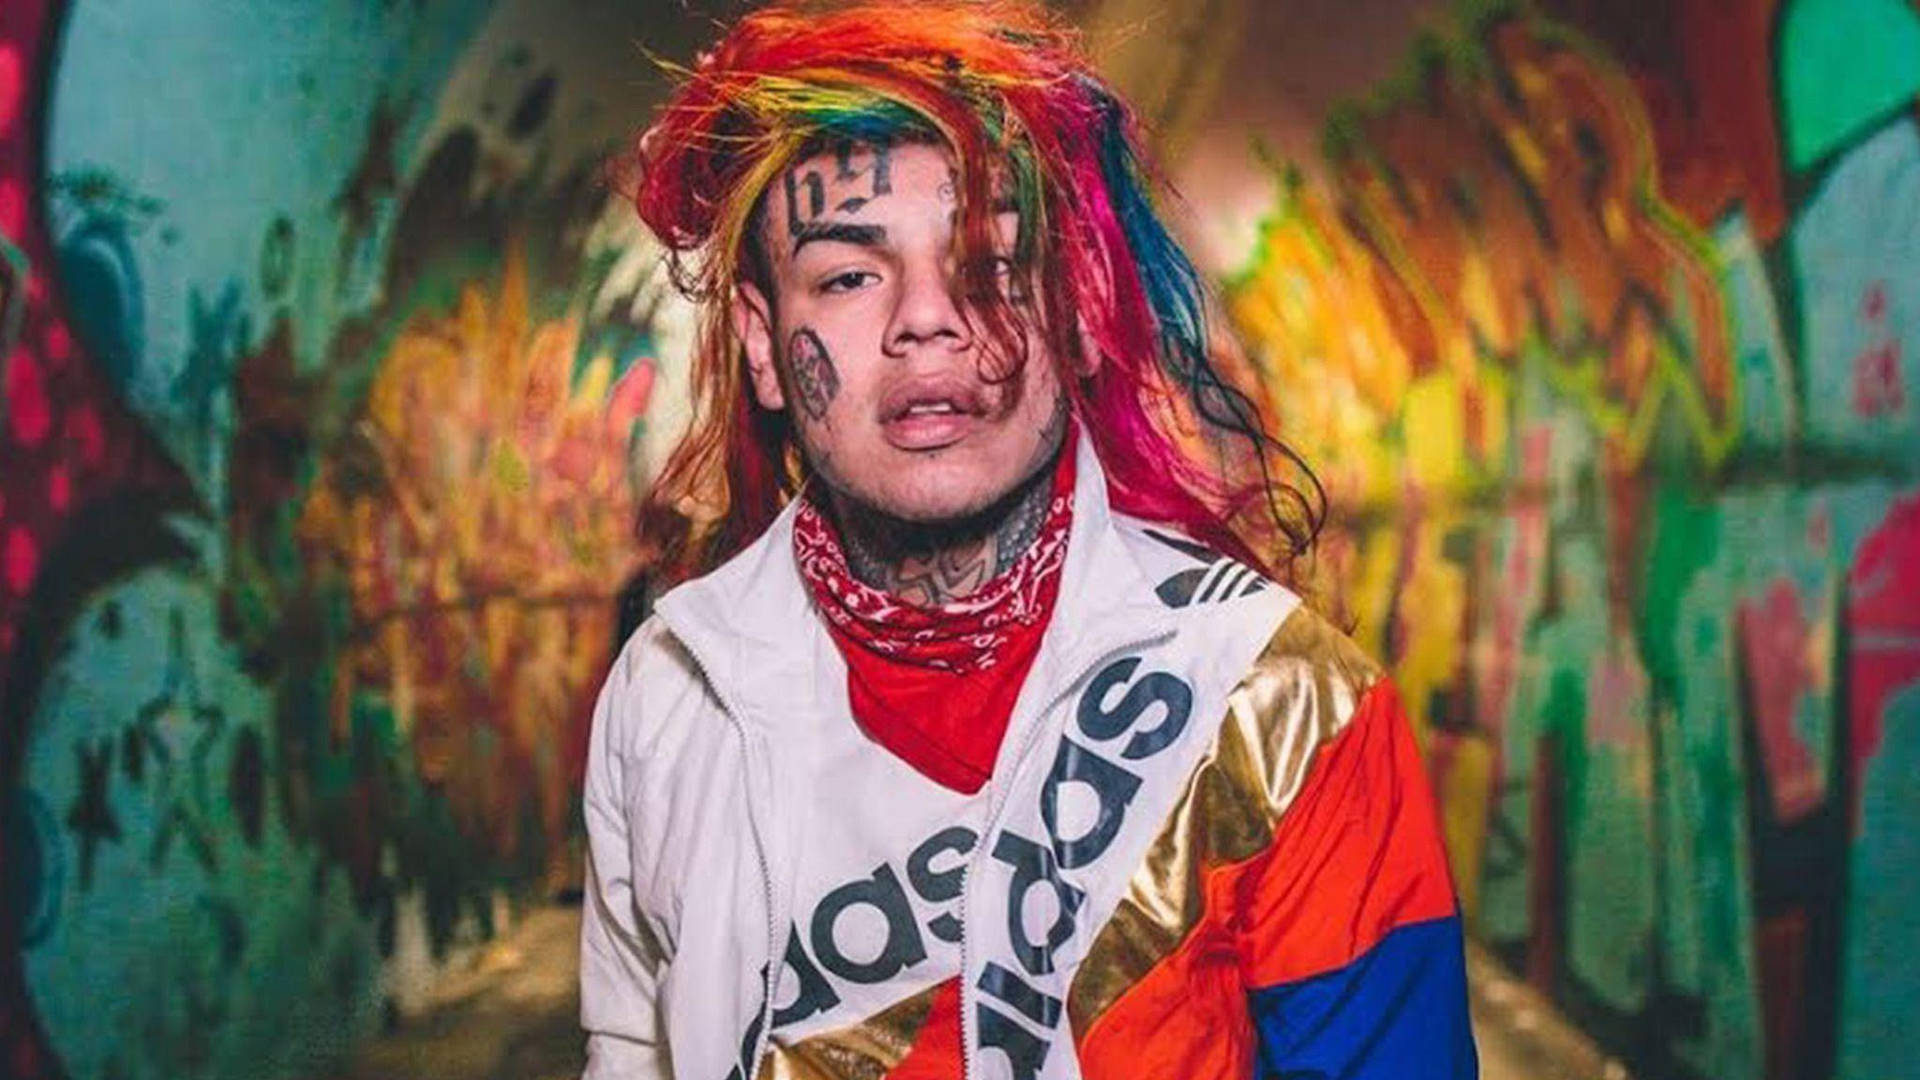 6ix9ine In A Tunnel Background